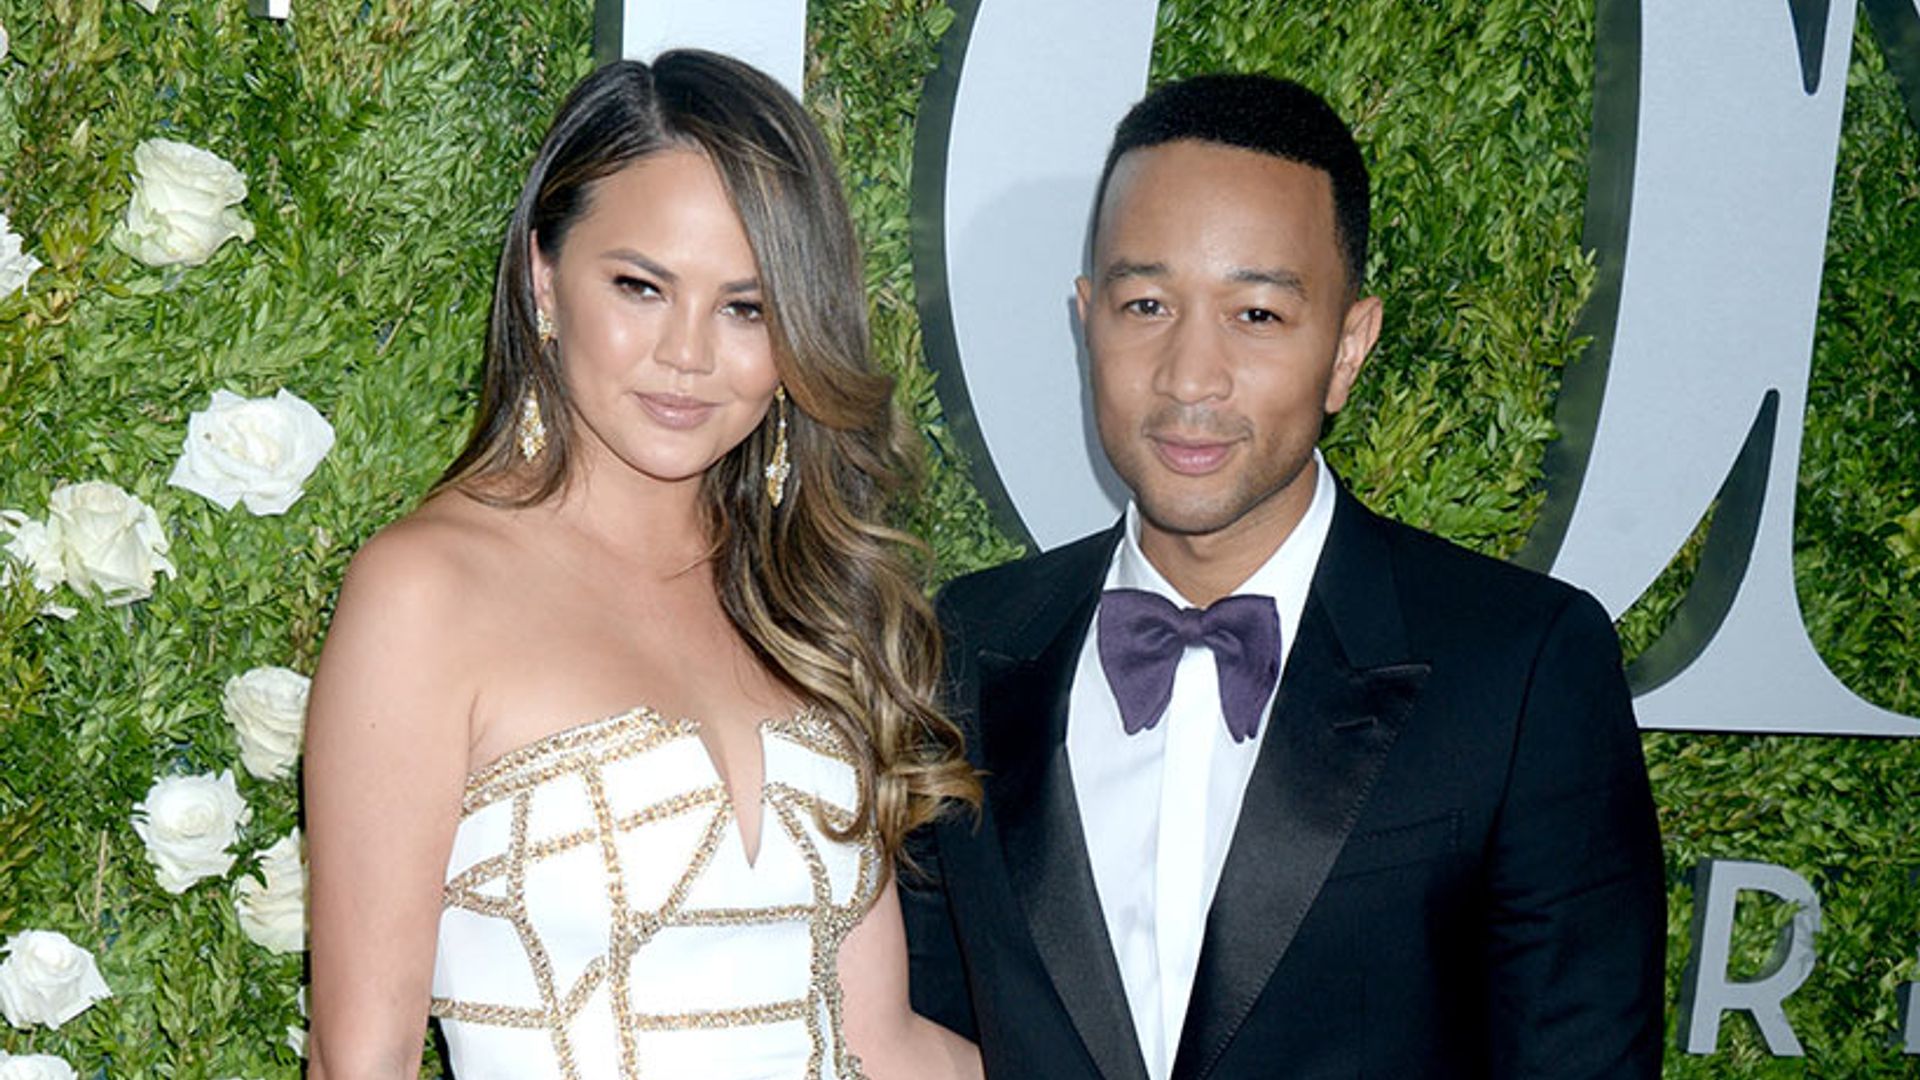 John Legend on how IVF strengthened his bond with wife, Chrissy Teigen